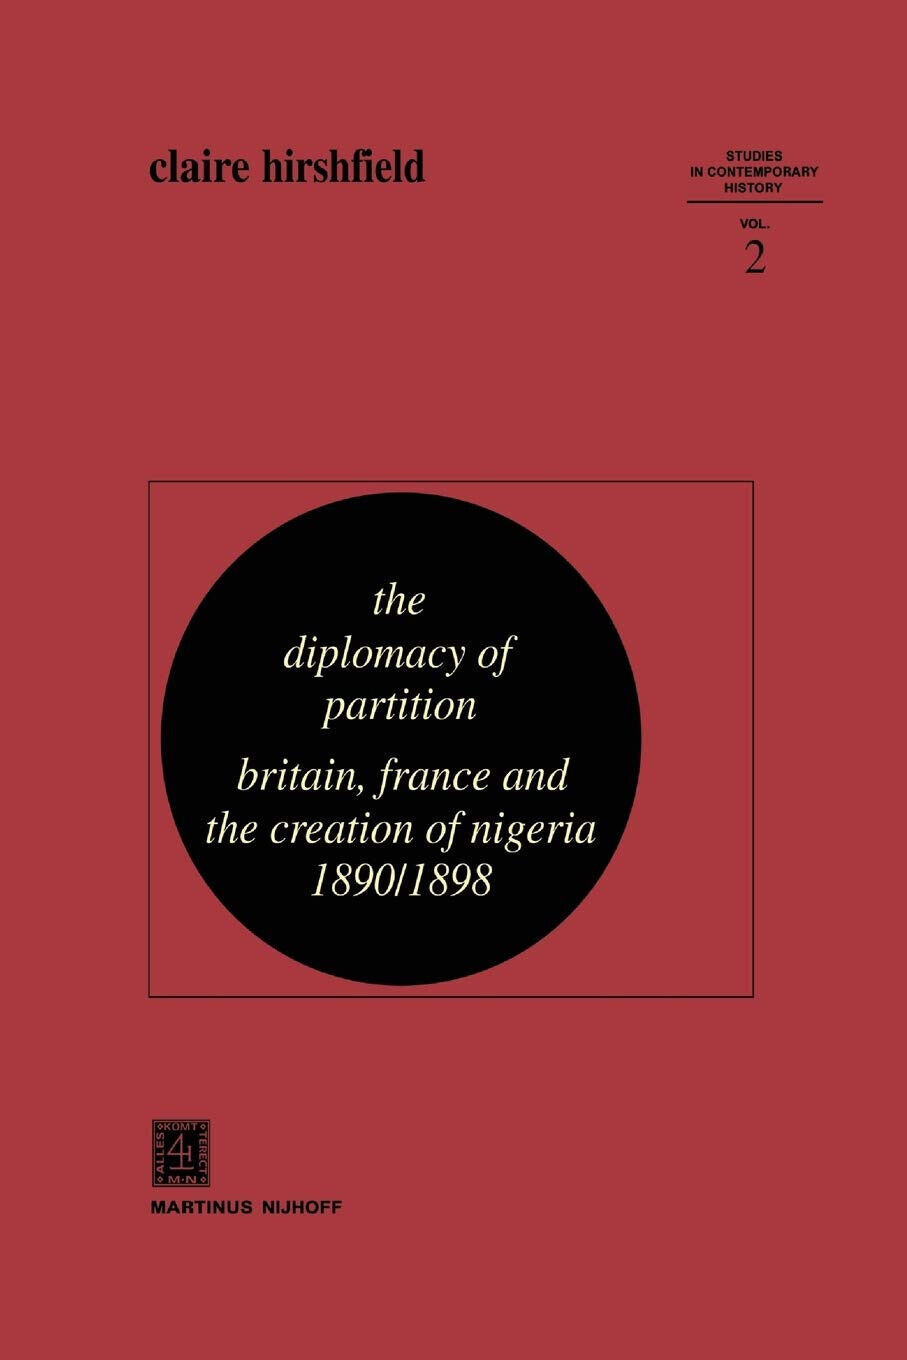 The Diplomacy of Partition - C. Hirshfield - Springer, 2013